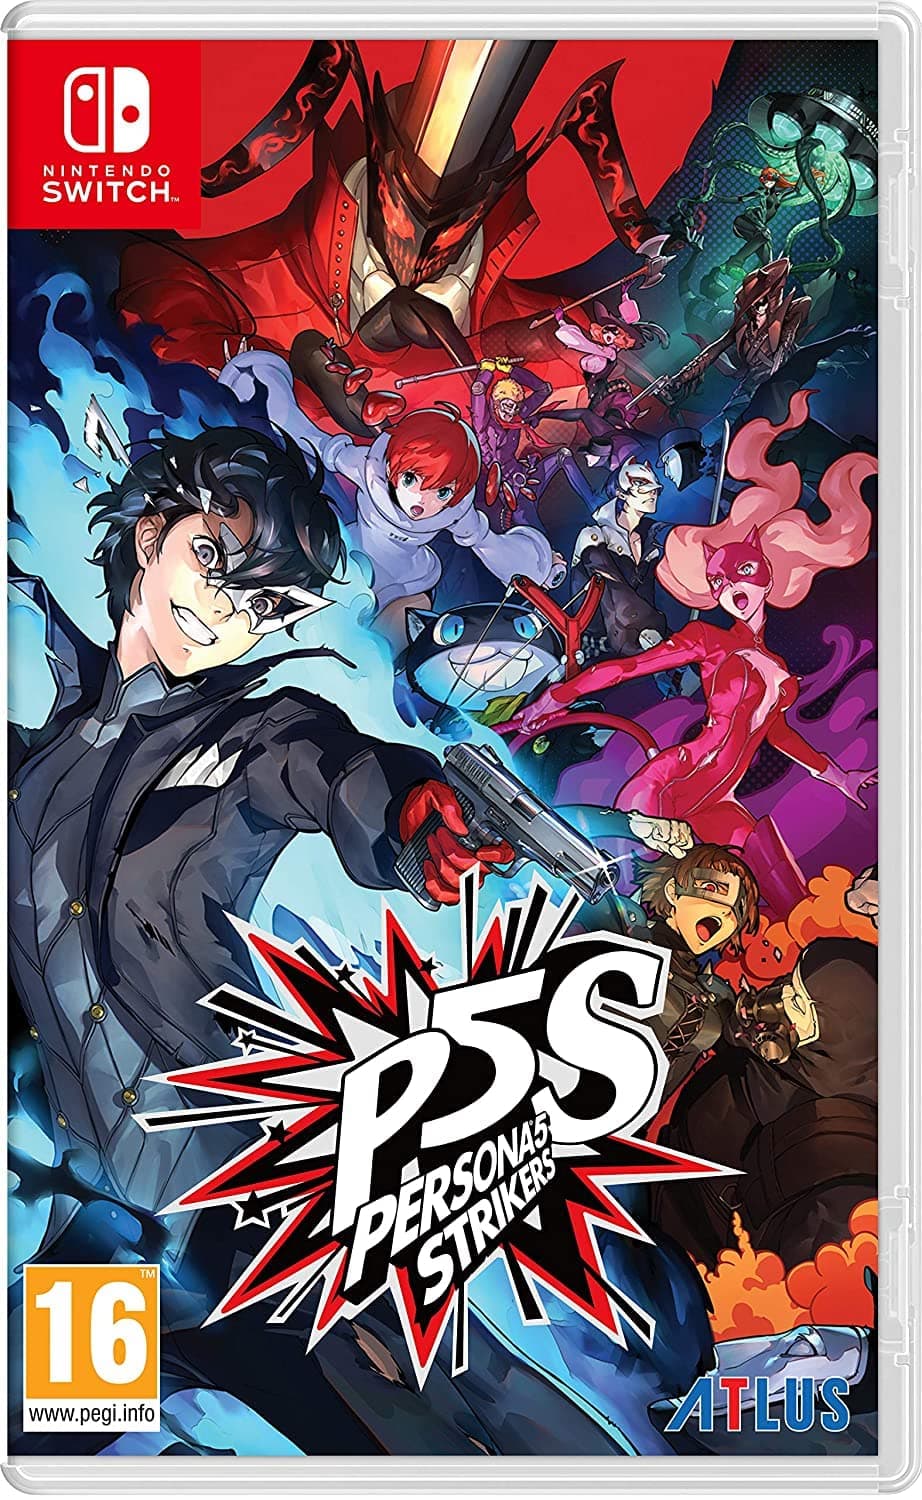 Persona 5 Strikers for Nintendo Switch.